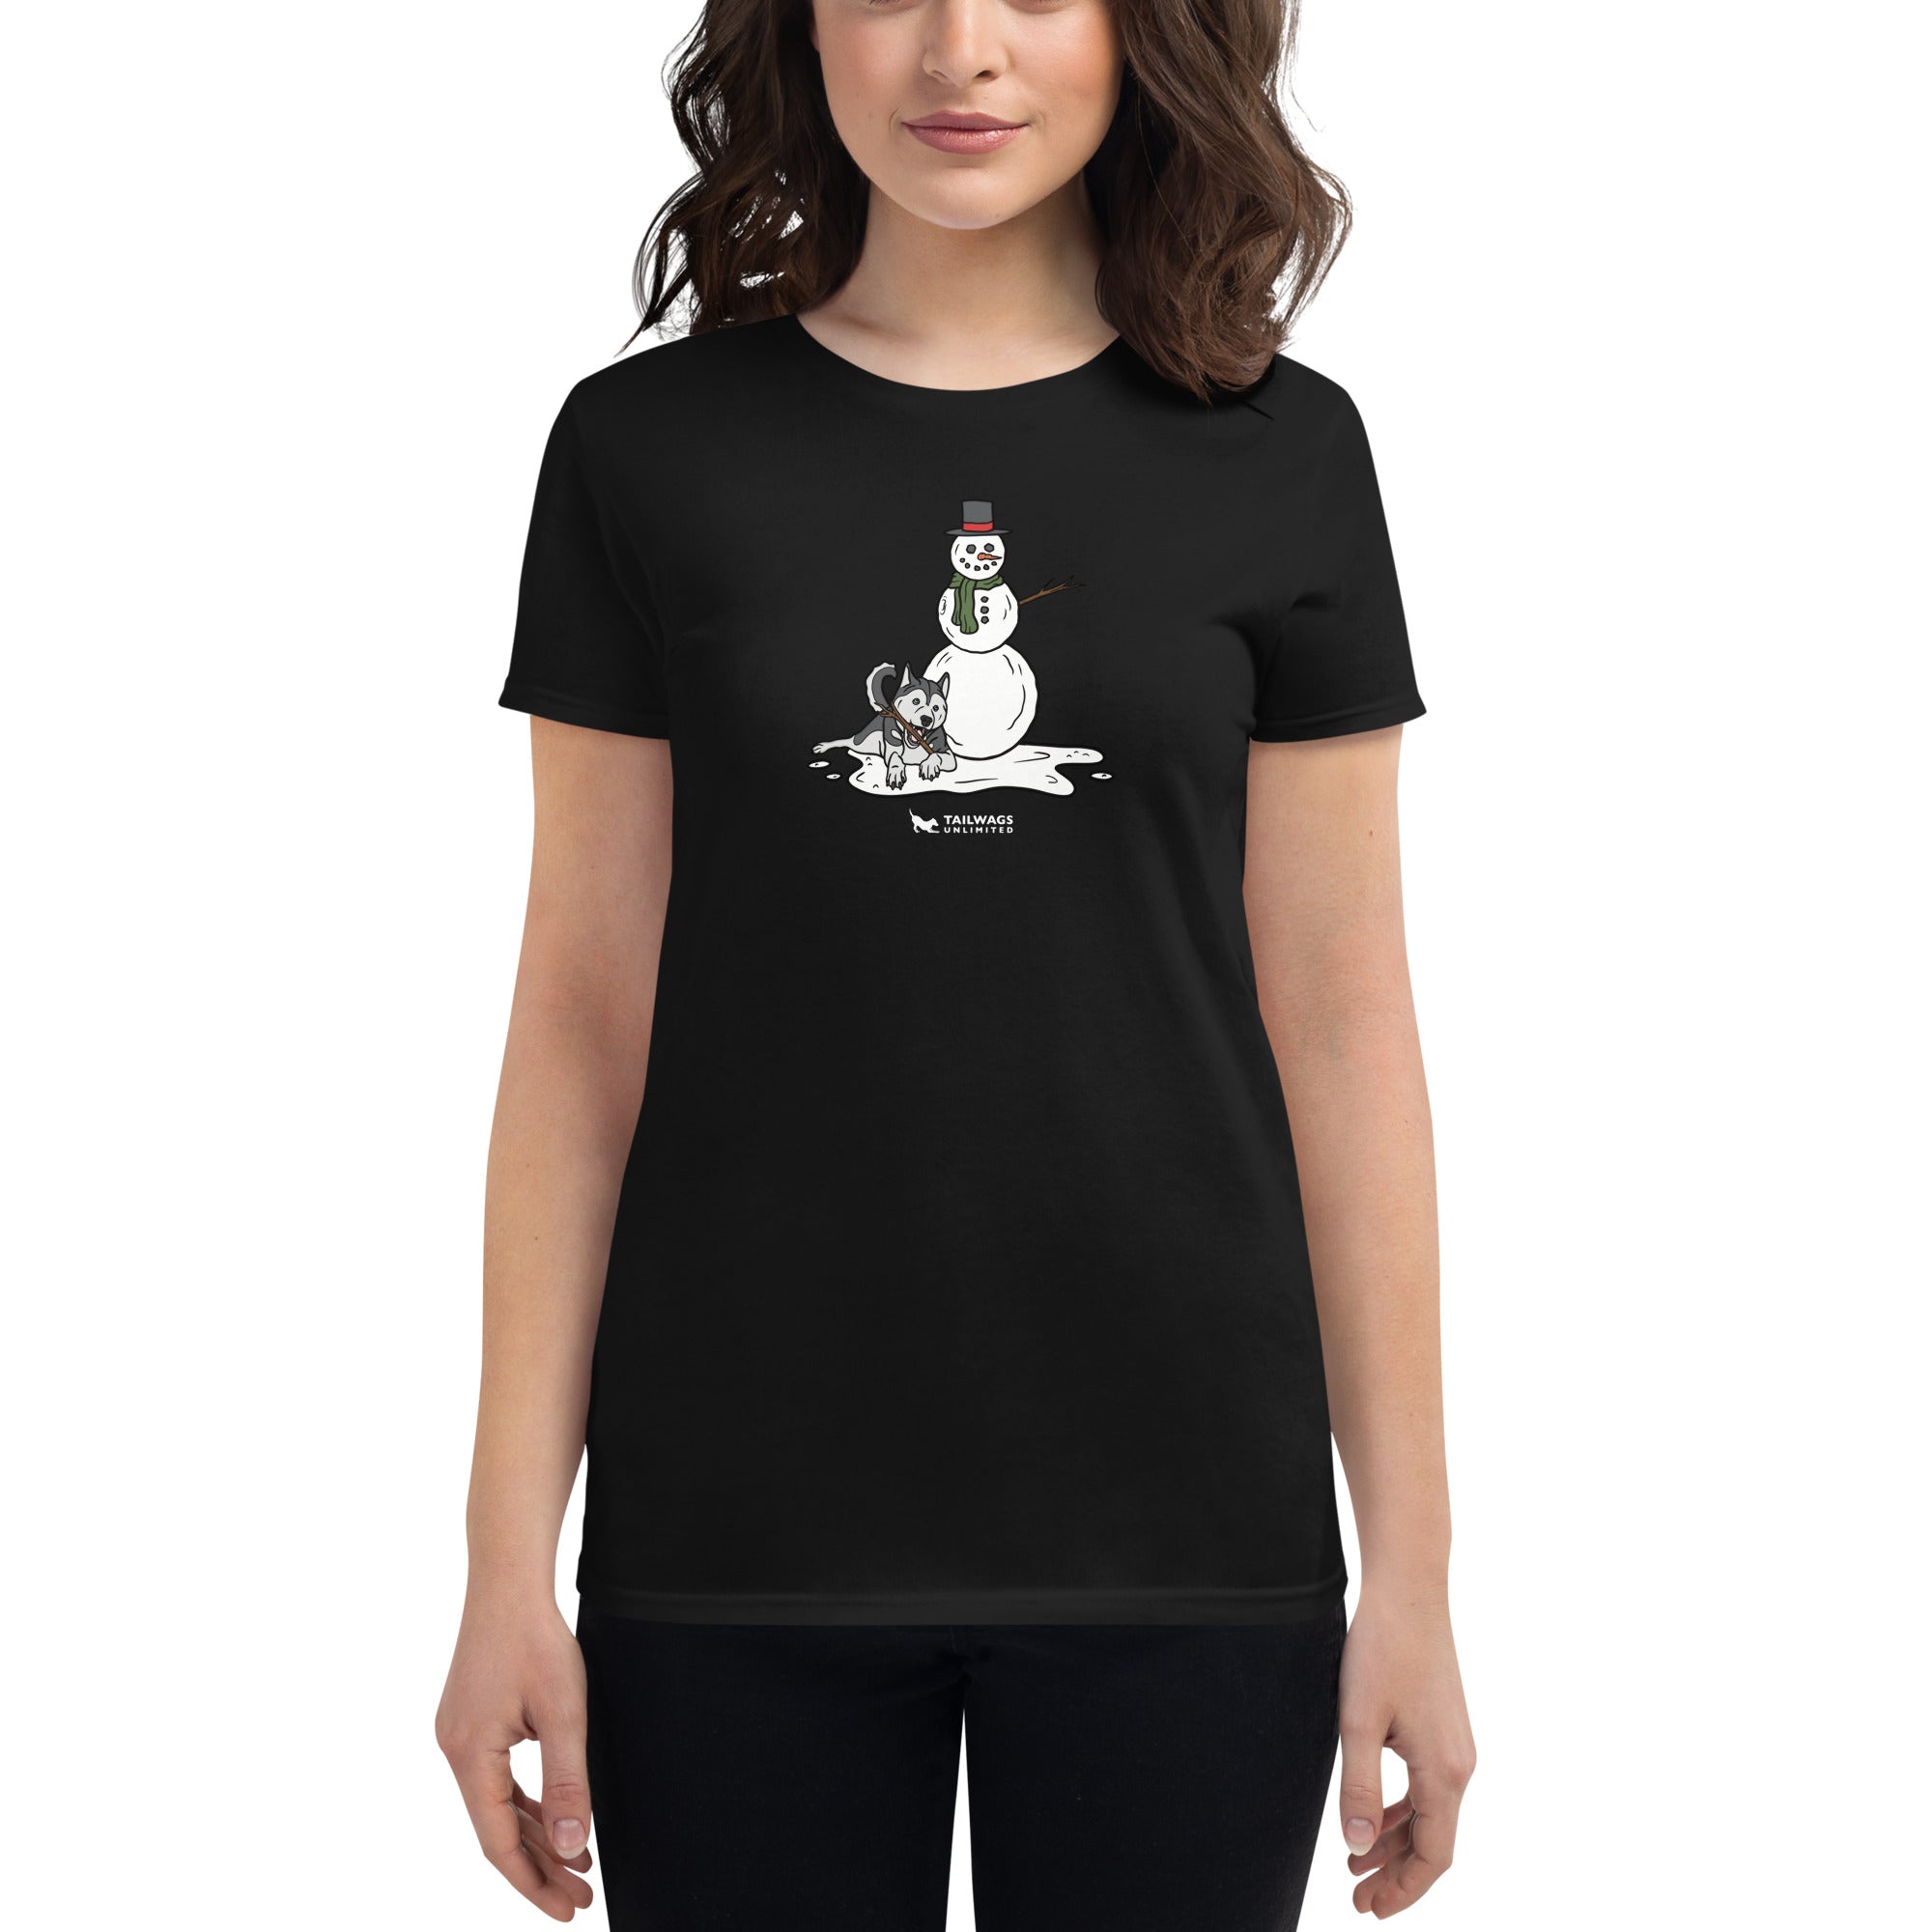 Favorite Chewing Stick Women's Fit T-Shirt - TAILWAGS UNLIMITED